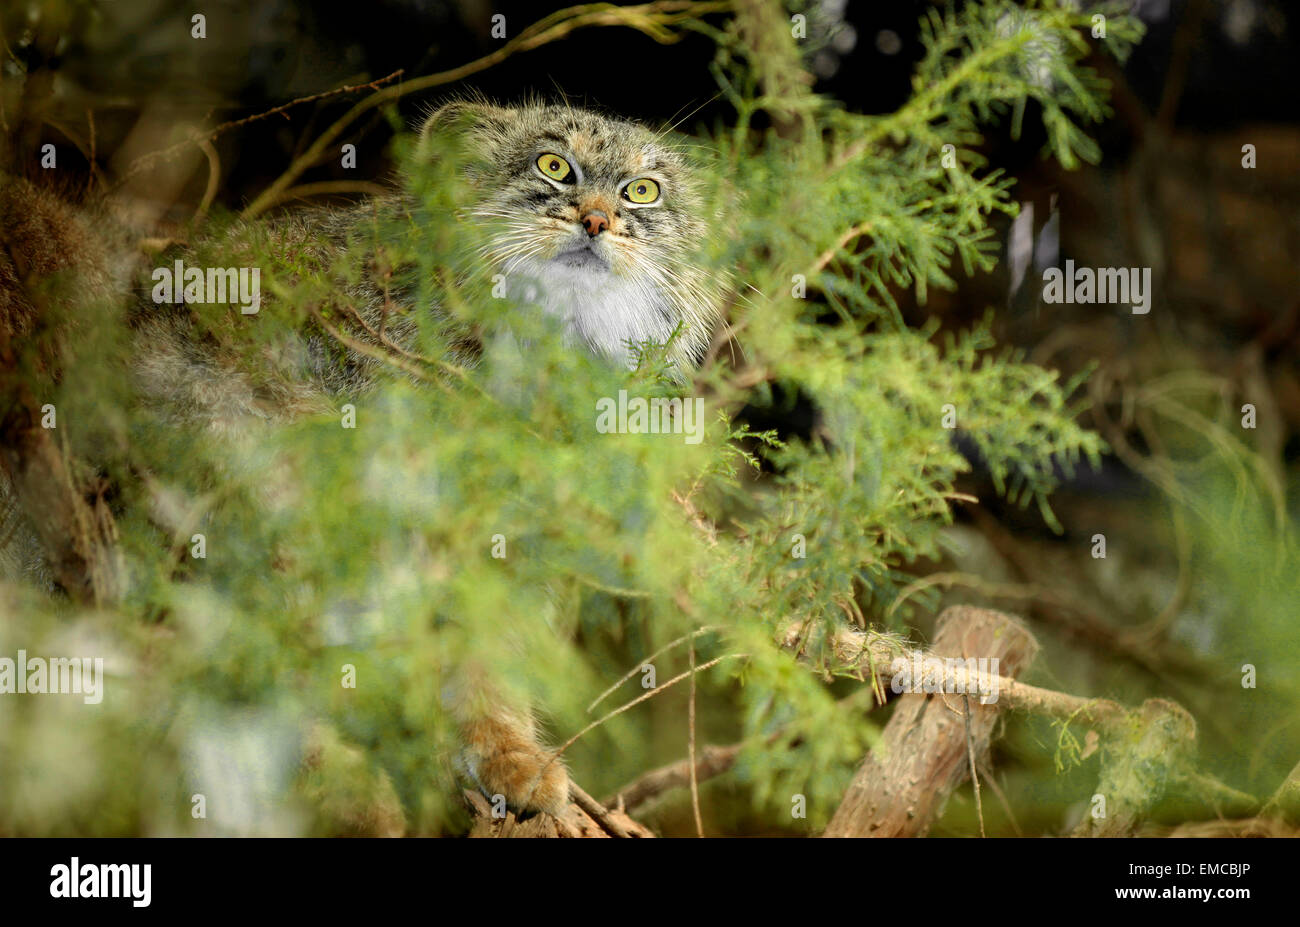 Manul or Pallas Cat (Otocolobus manul) on a branch Stock Photo